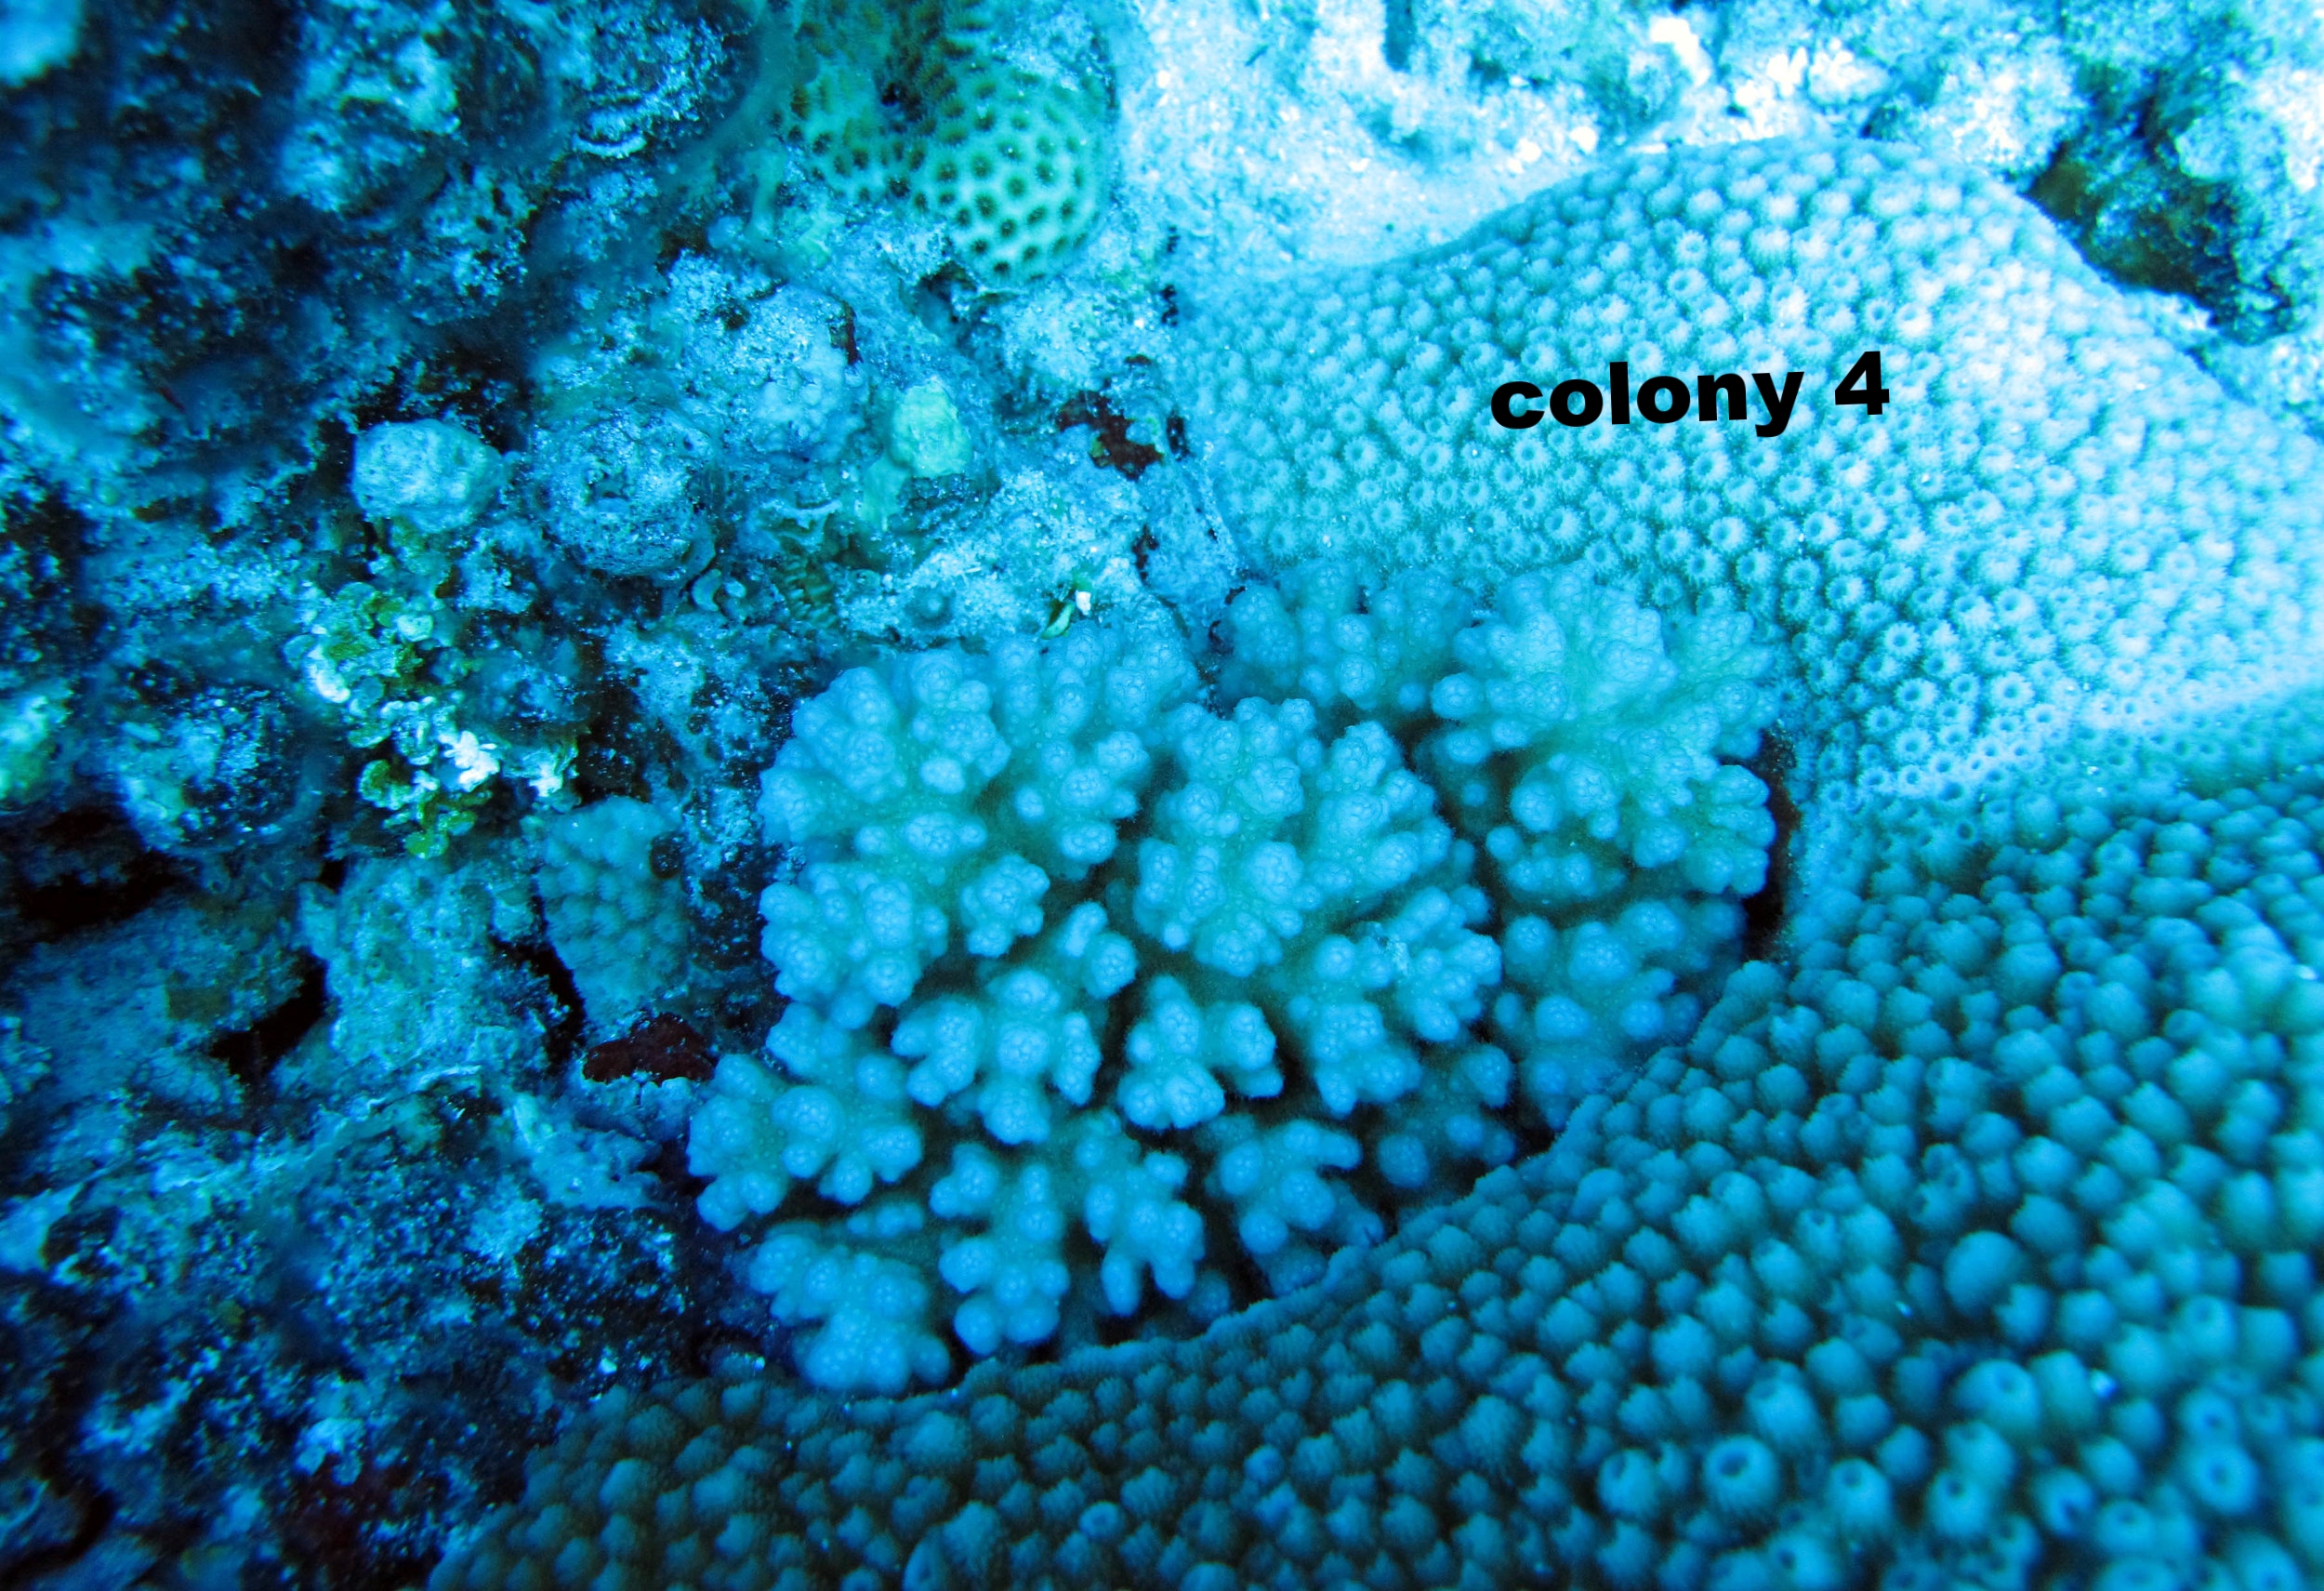   Pocillopora damicornis   genotype  alpha   Click here for data:  JMP  or  Excel .  